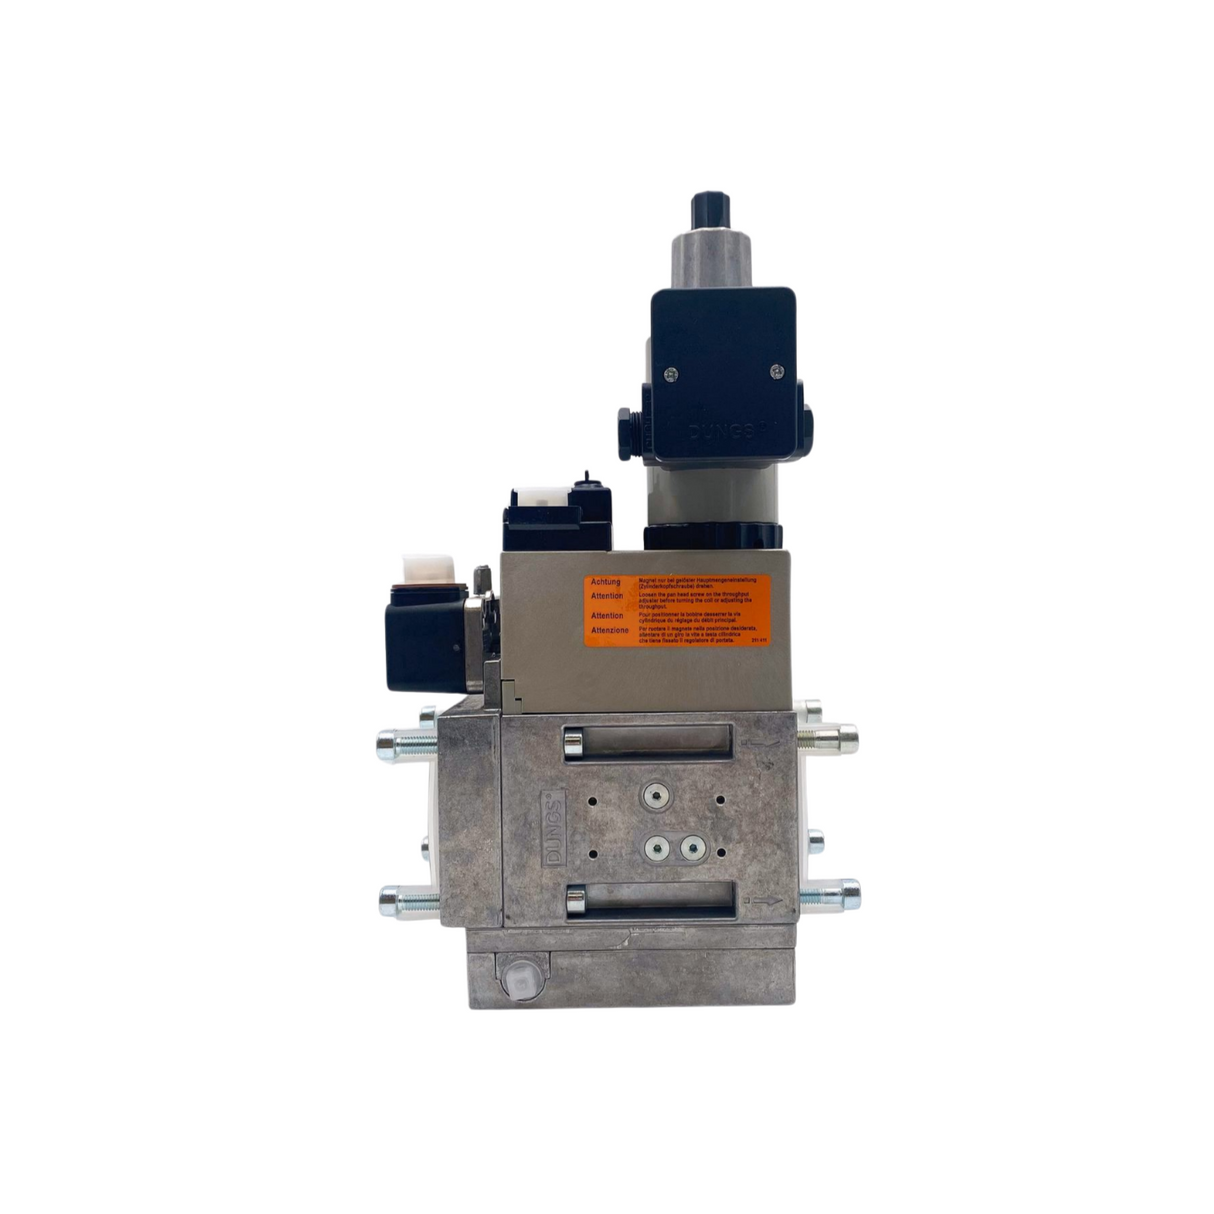 Dungs MB-ZRDLE 420 B01 S52 + GW150 A5 Multibloc Gas Valve - 110v